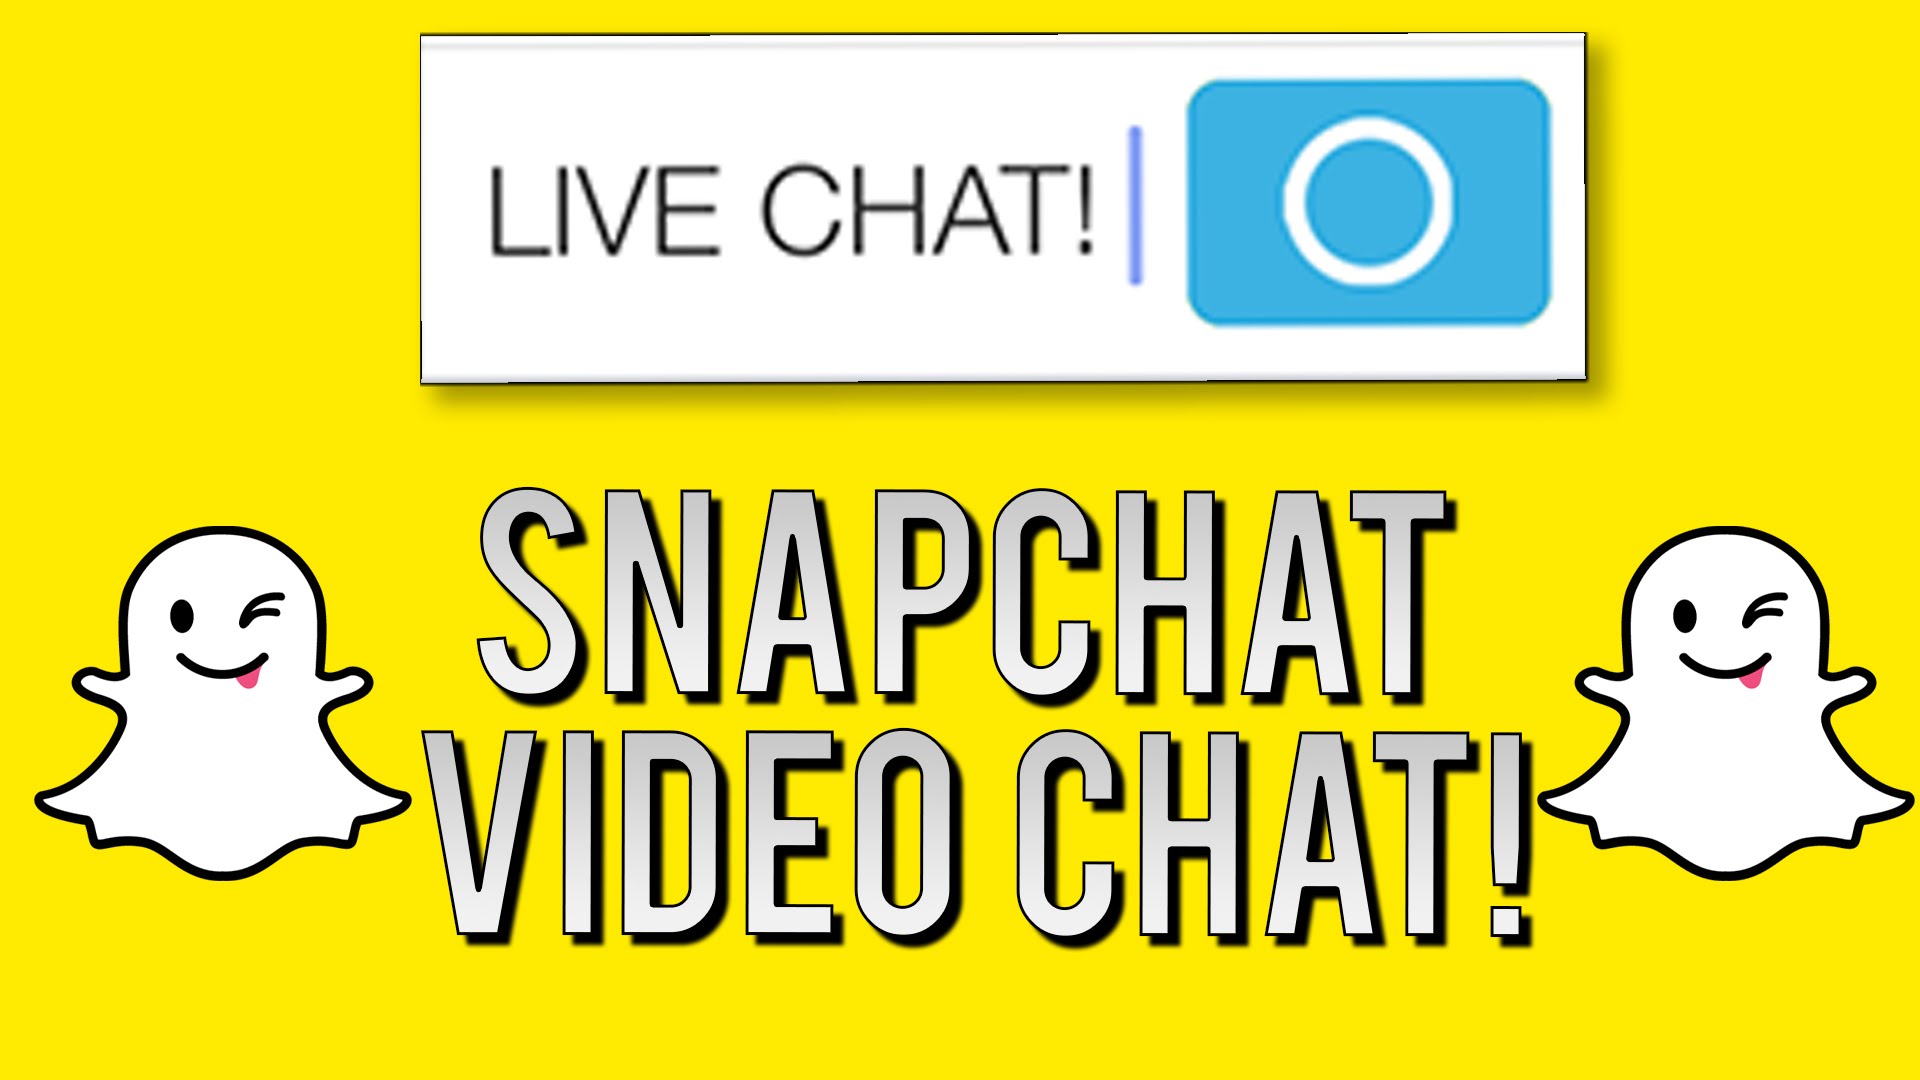 Snapchat Video Chat: How to Video Chat on Snapchat